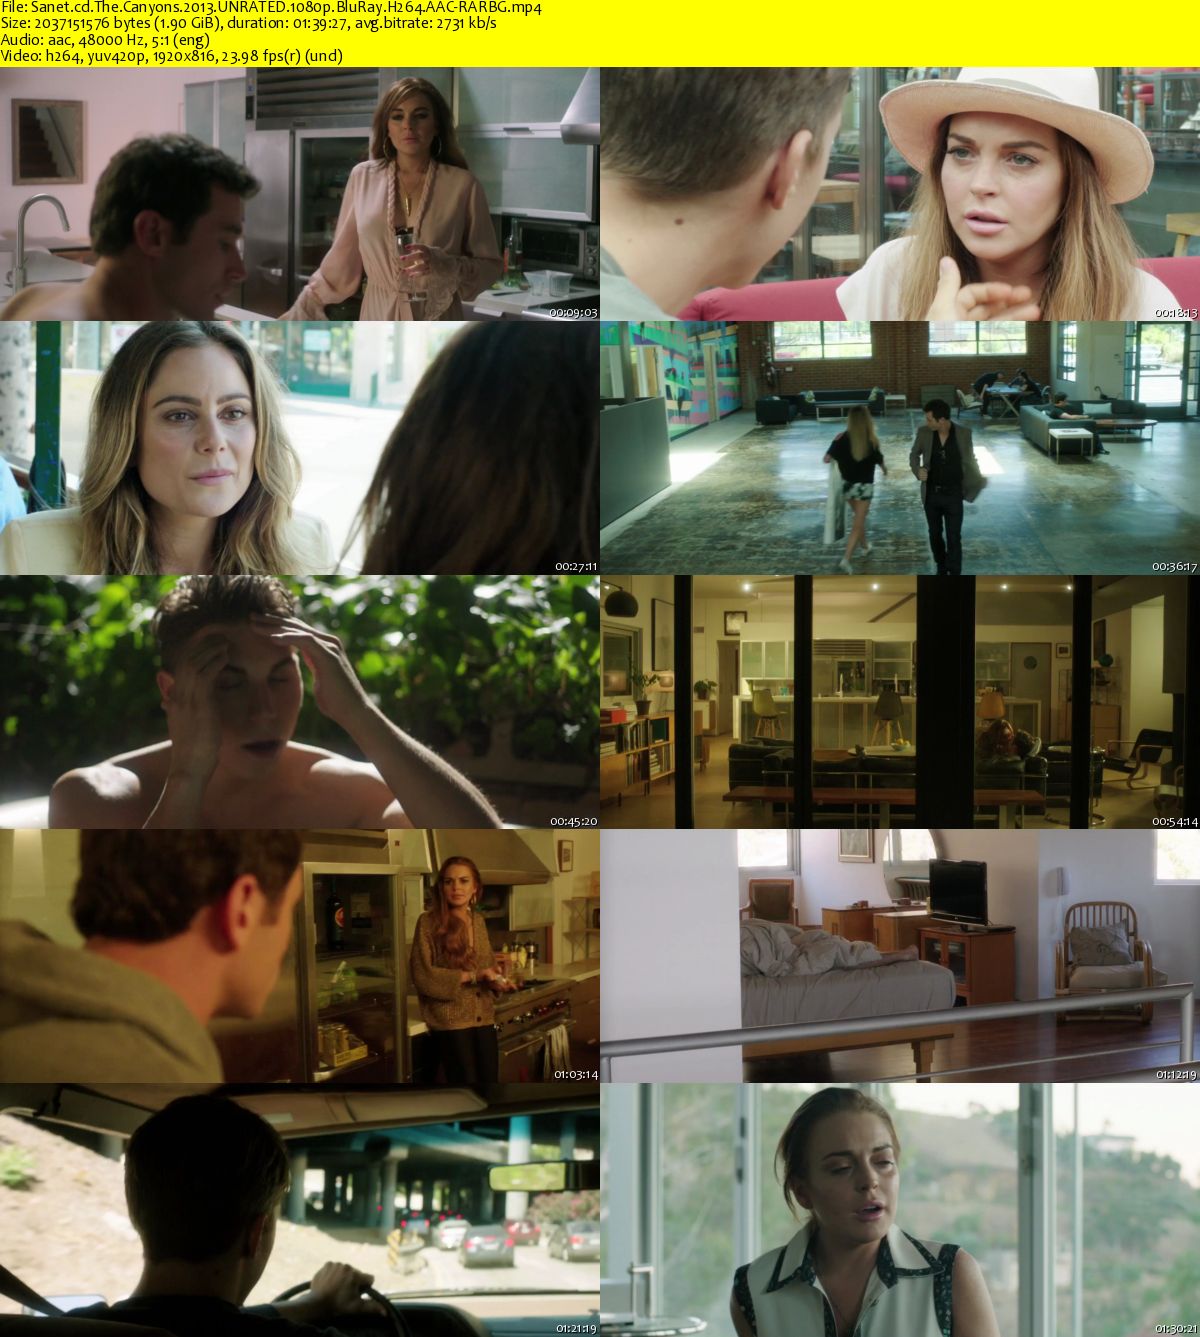 The Canyons 2013 UNRATED 1080p BluRay H264 AAC-RARBG.